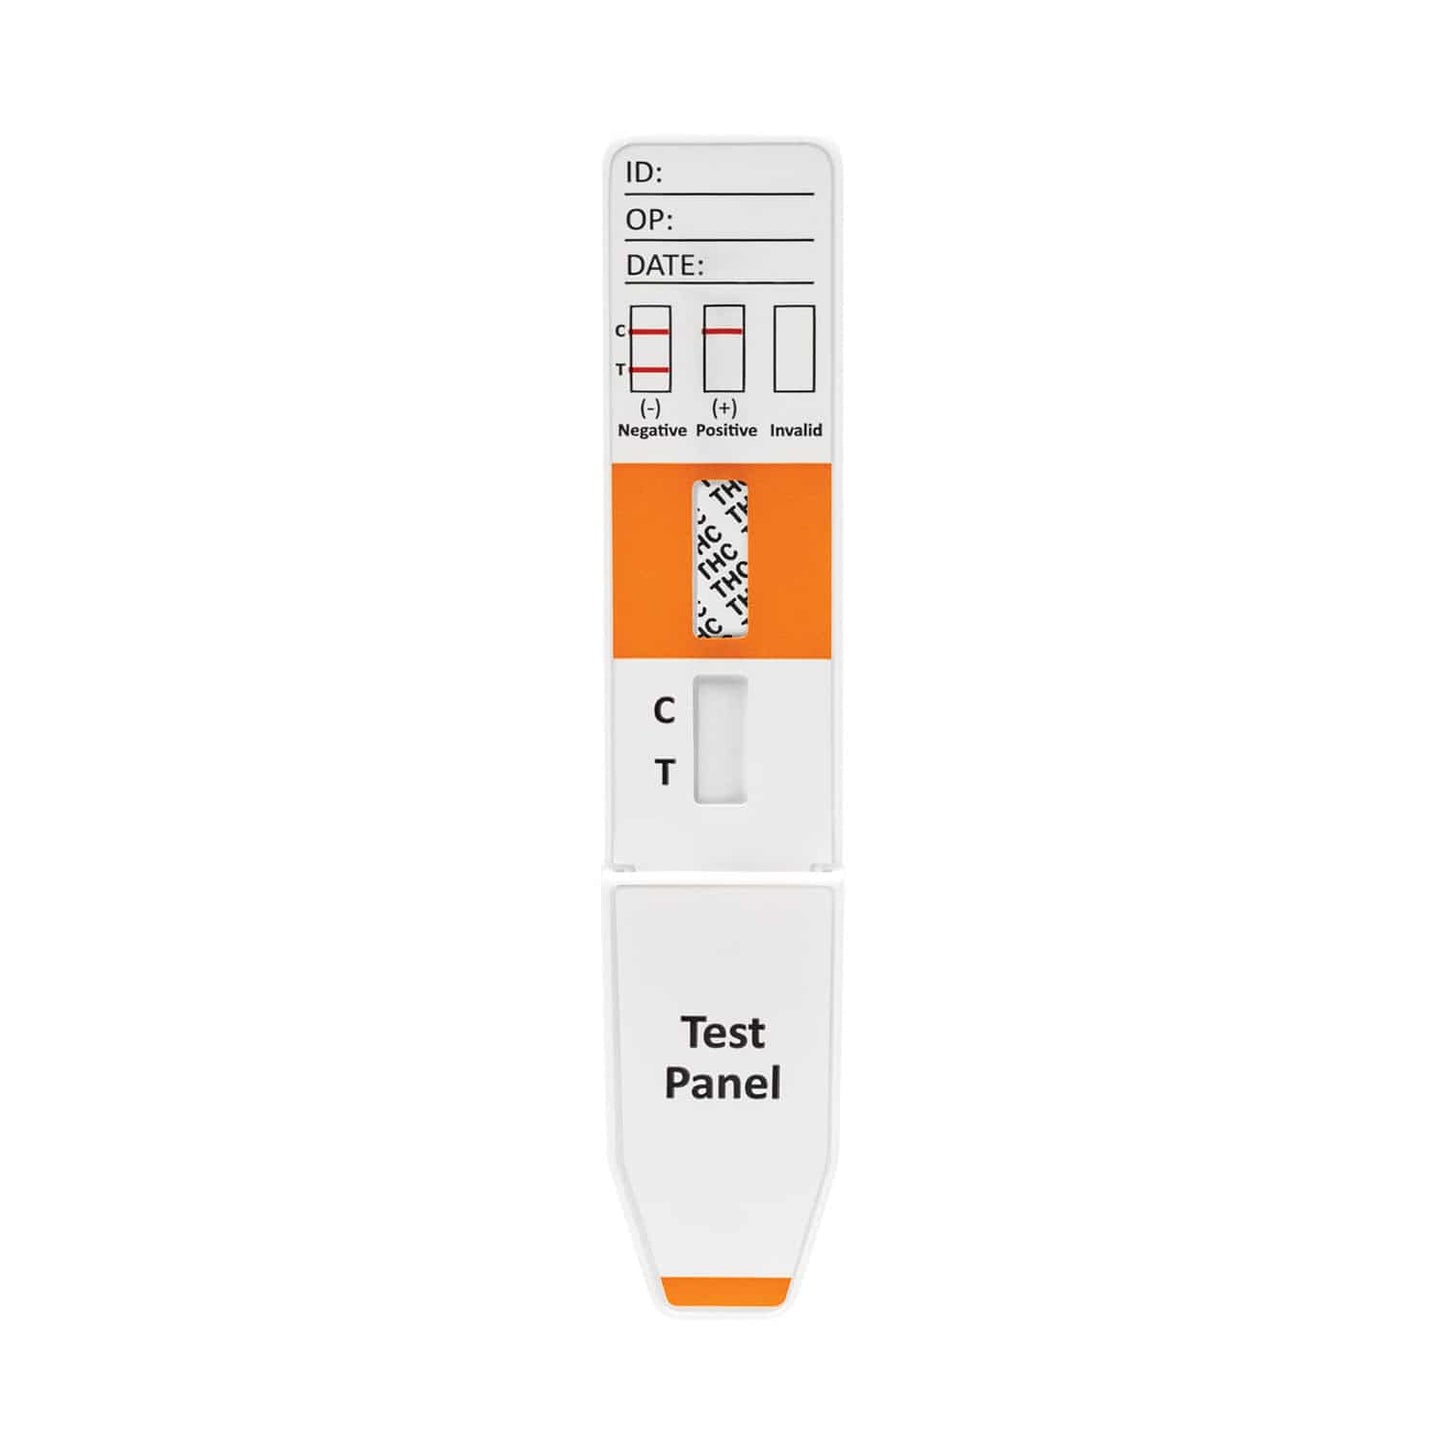 Surestep™ Powder Test Drug Screen Panel (K2) - (Image Differs From Product)